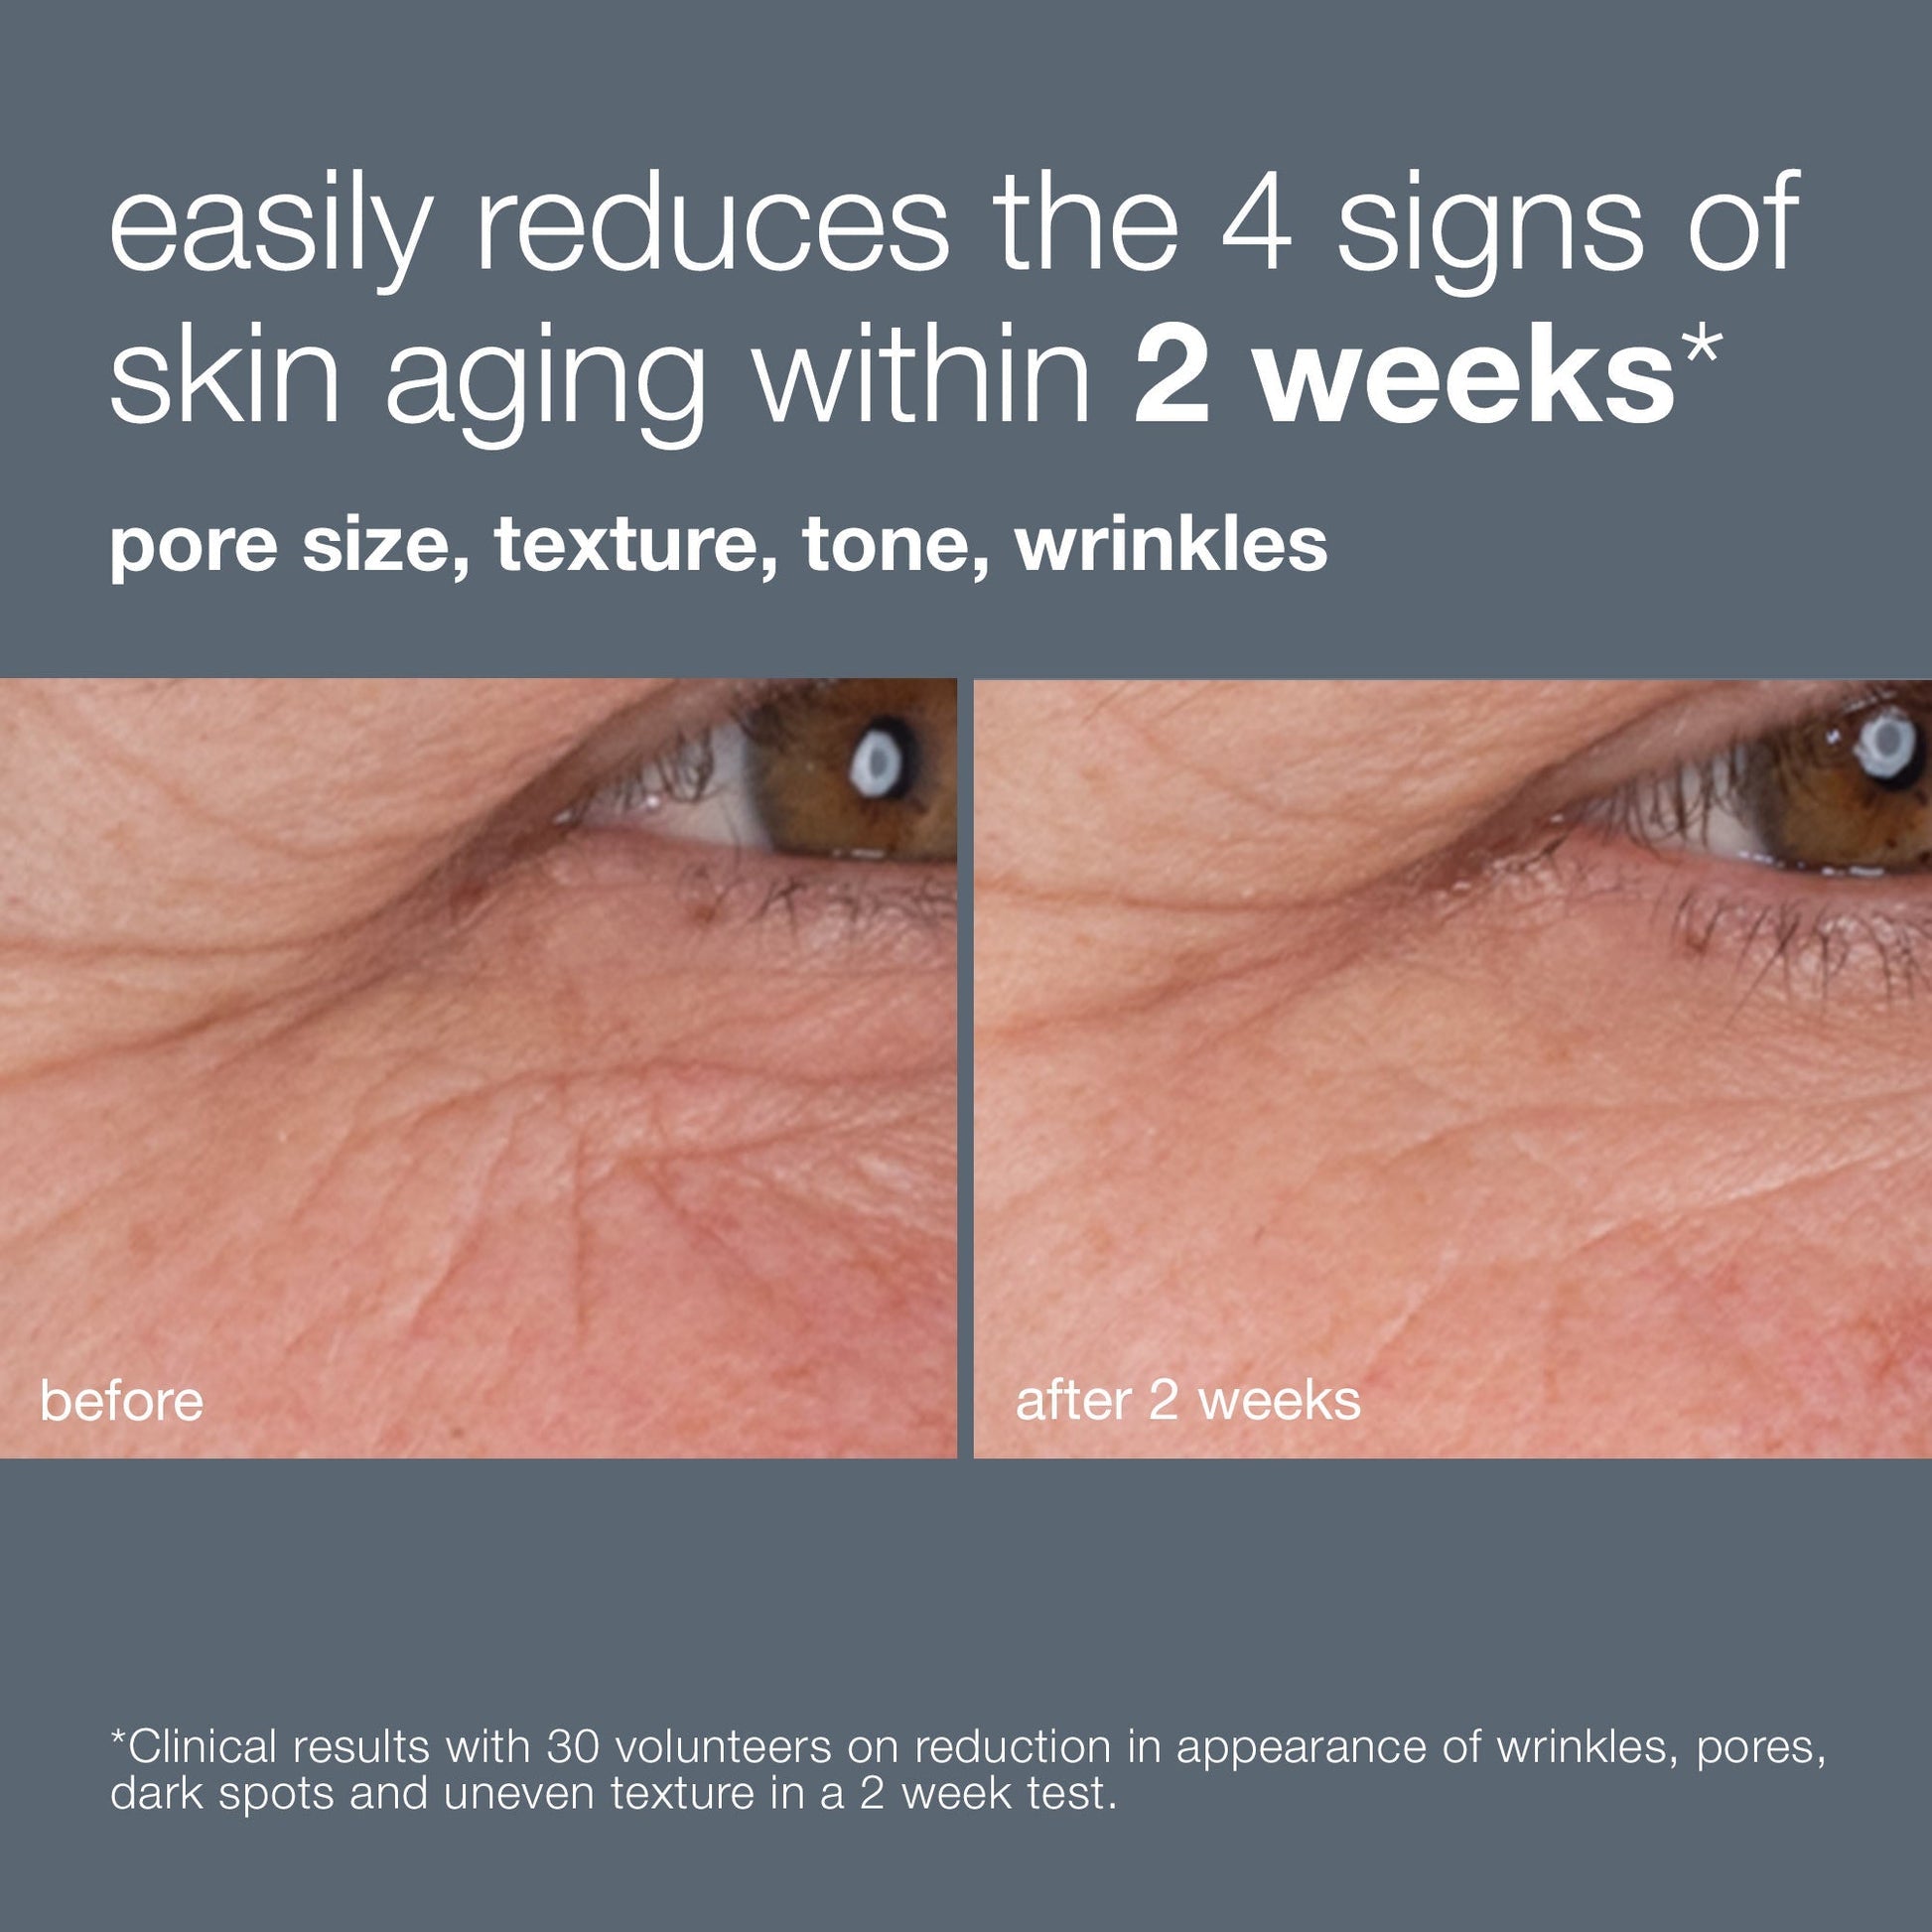 easily reduces the 4 signs of skin aging within 2 weeks. pore size, texture, tone and wrinkles